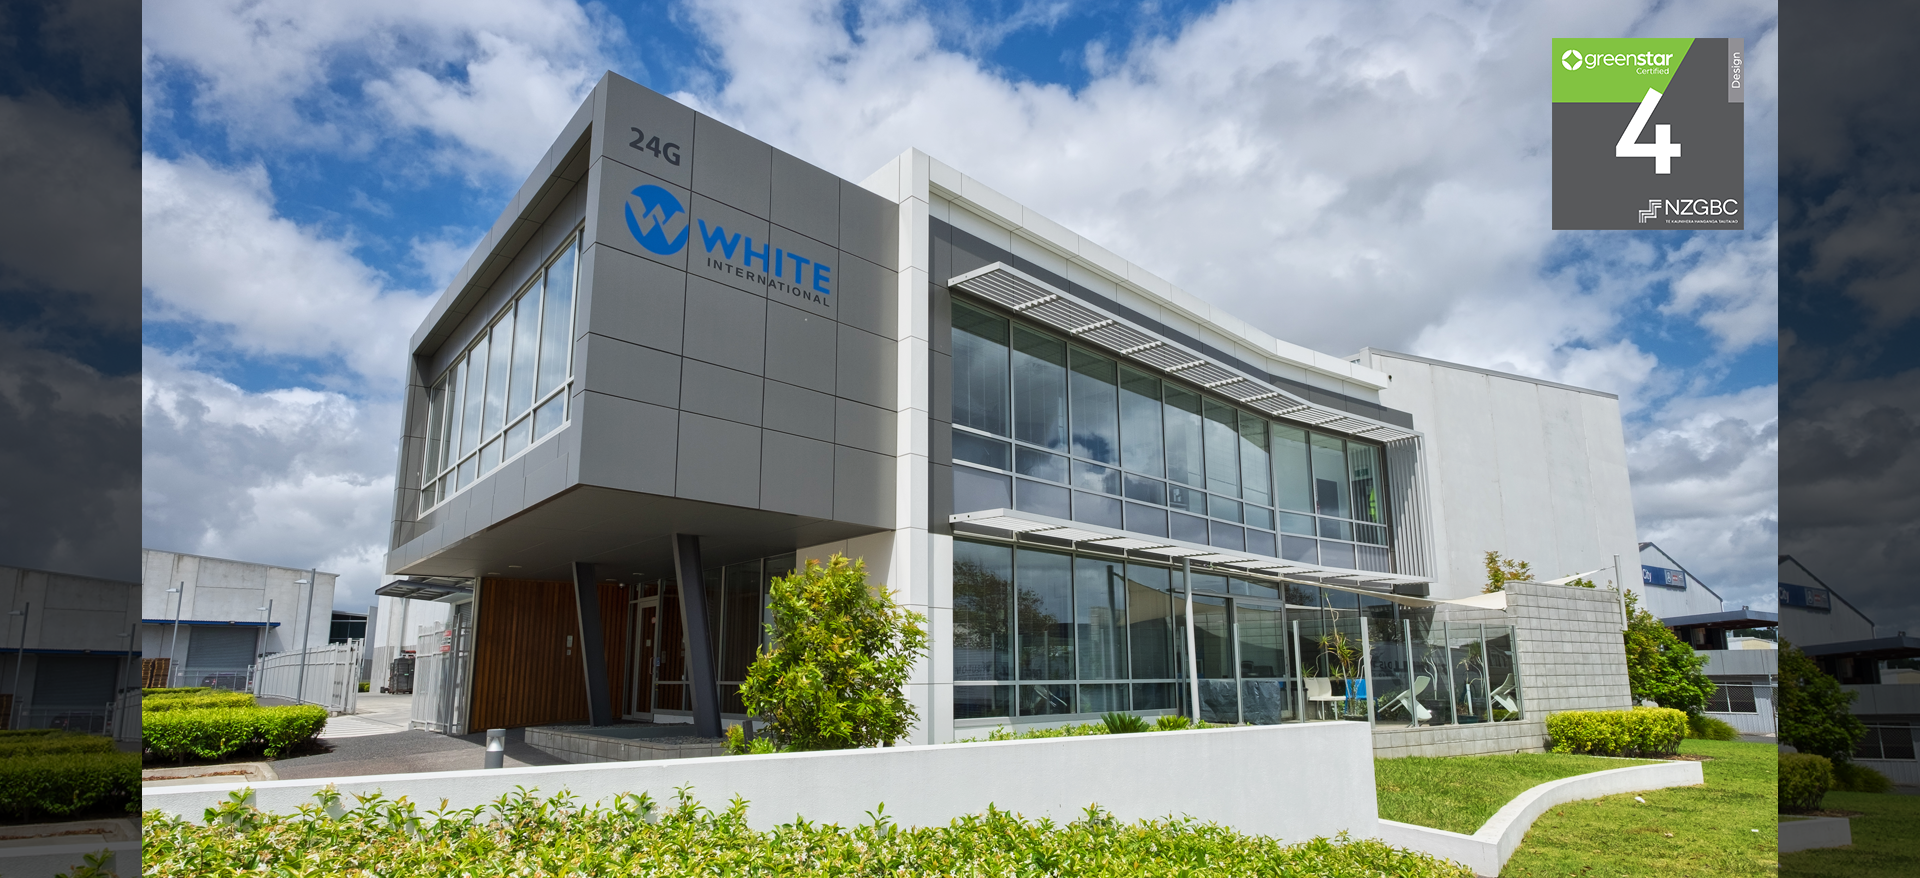 White International Warehouse and Office, Auckland